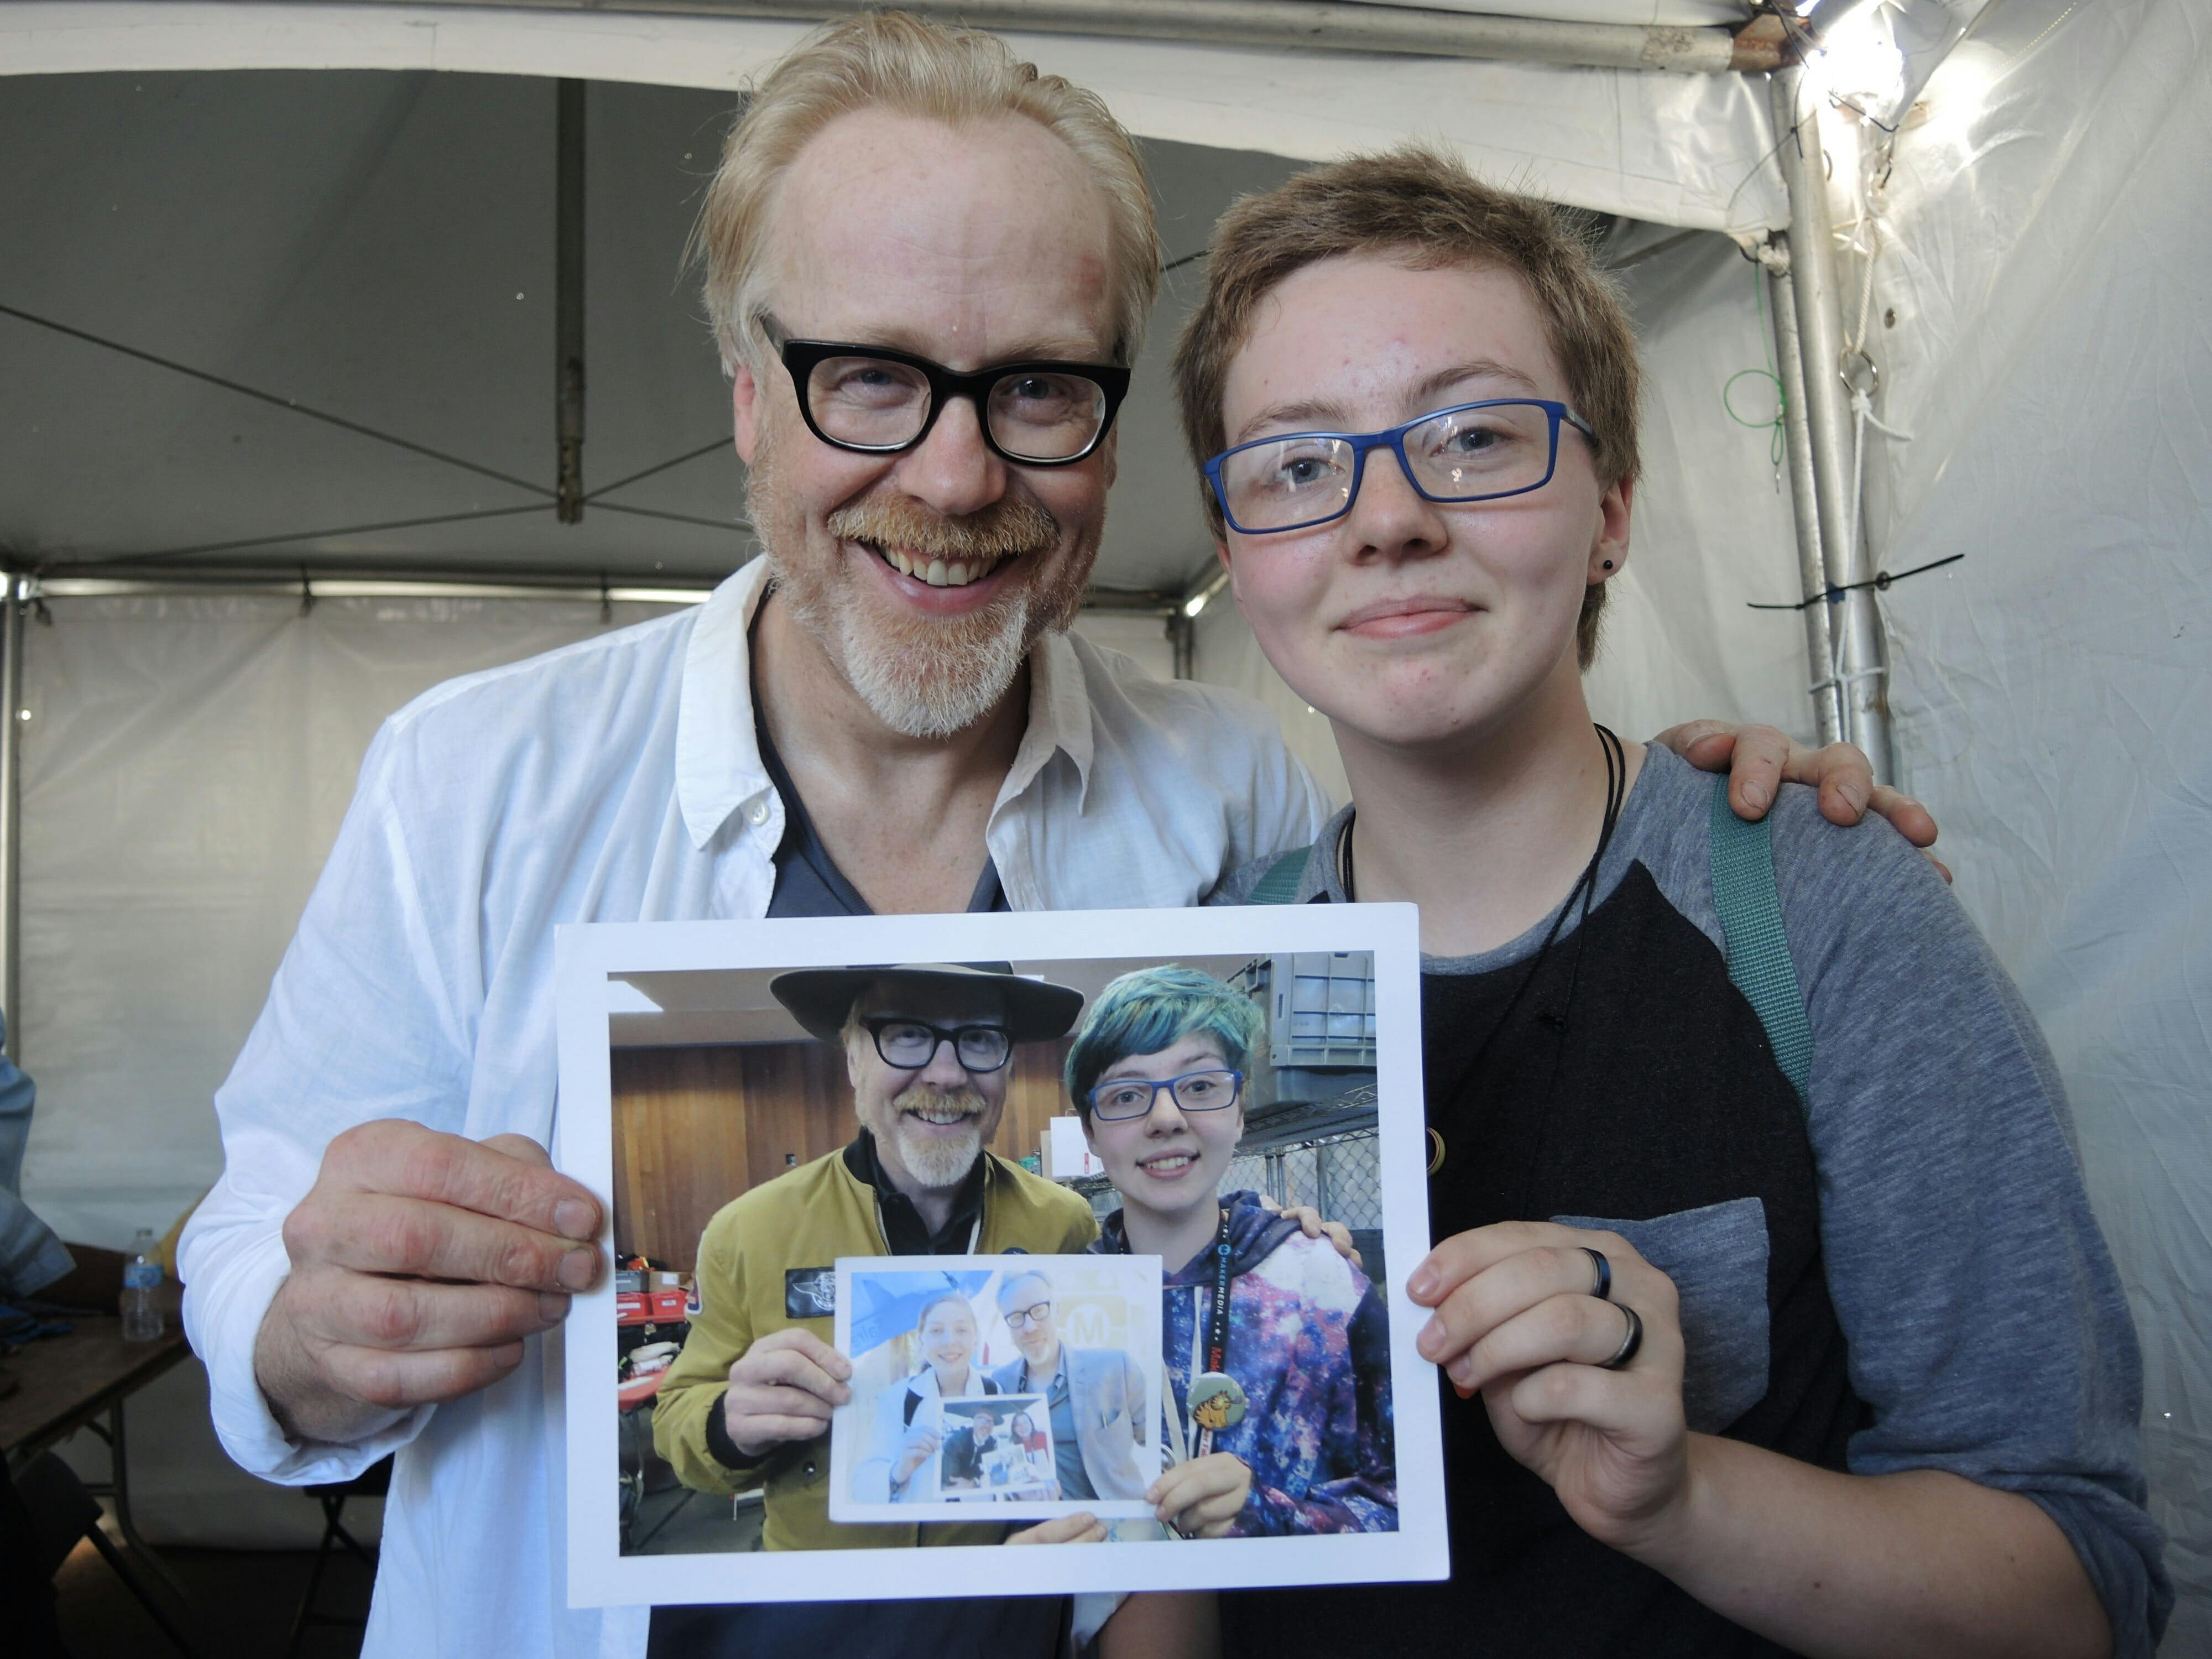 mythbusters fan inception photo